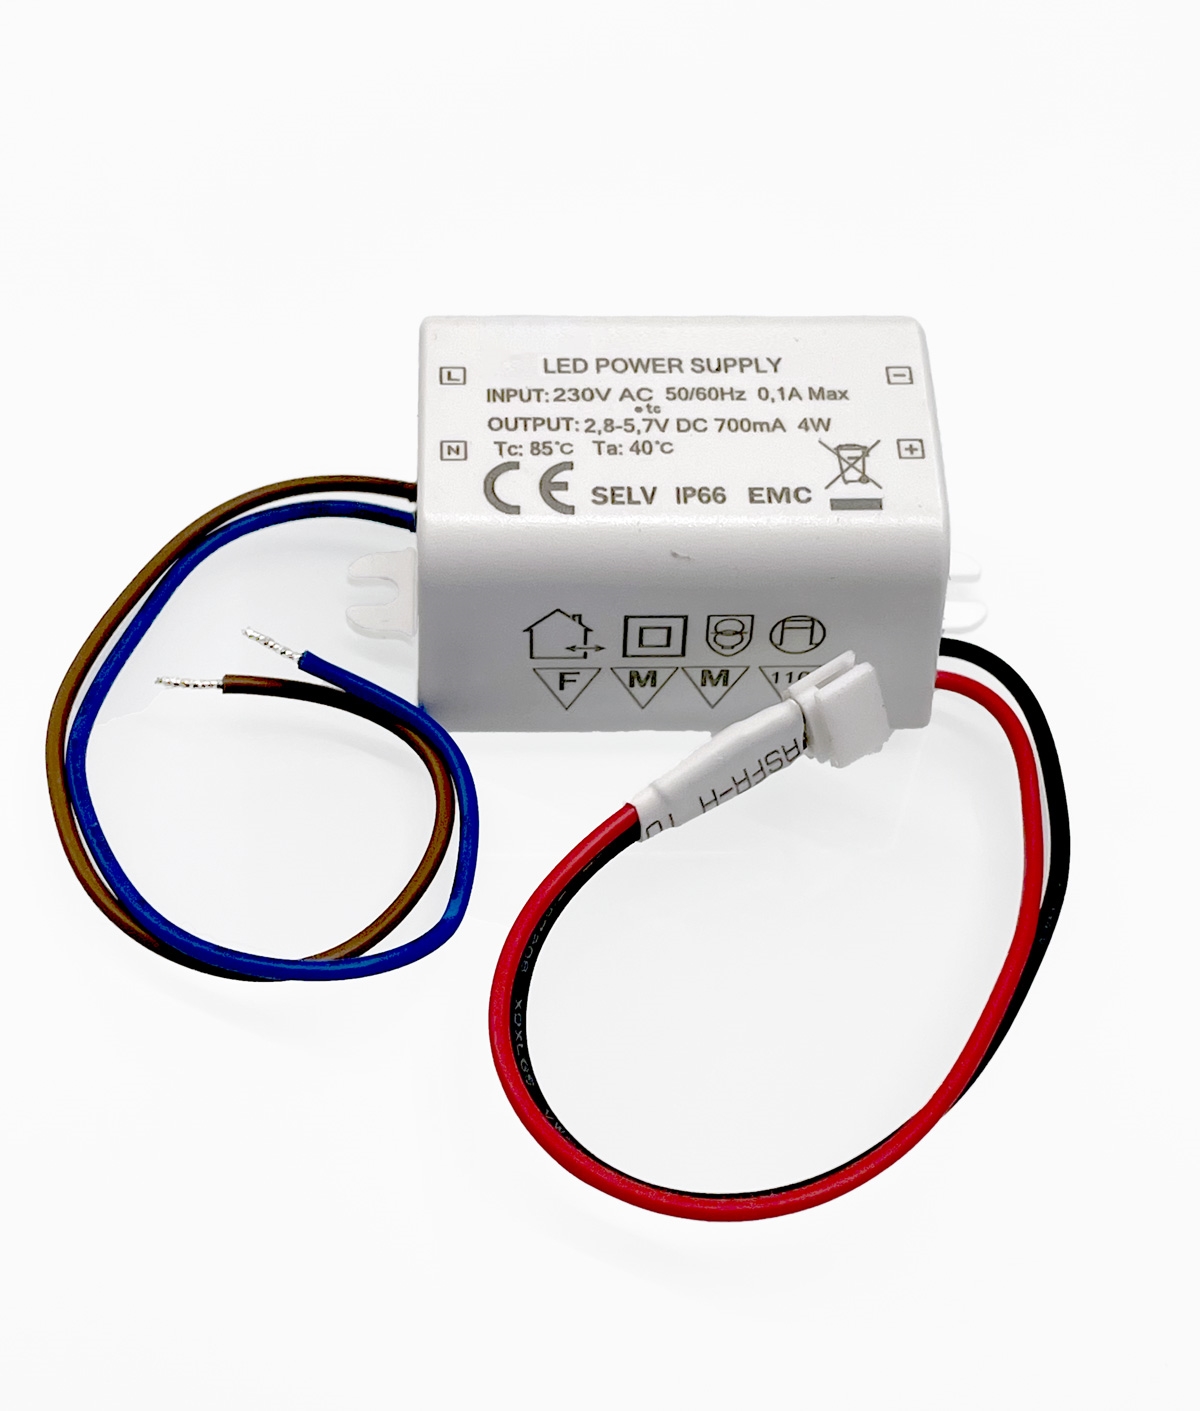 https://www.lightingstyles.co.uk/pics/100/700mA-Compact-dimmable-LED-driver-constant-current.jpg